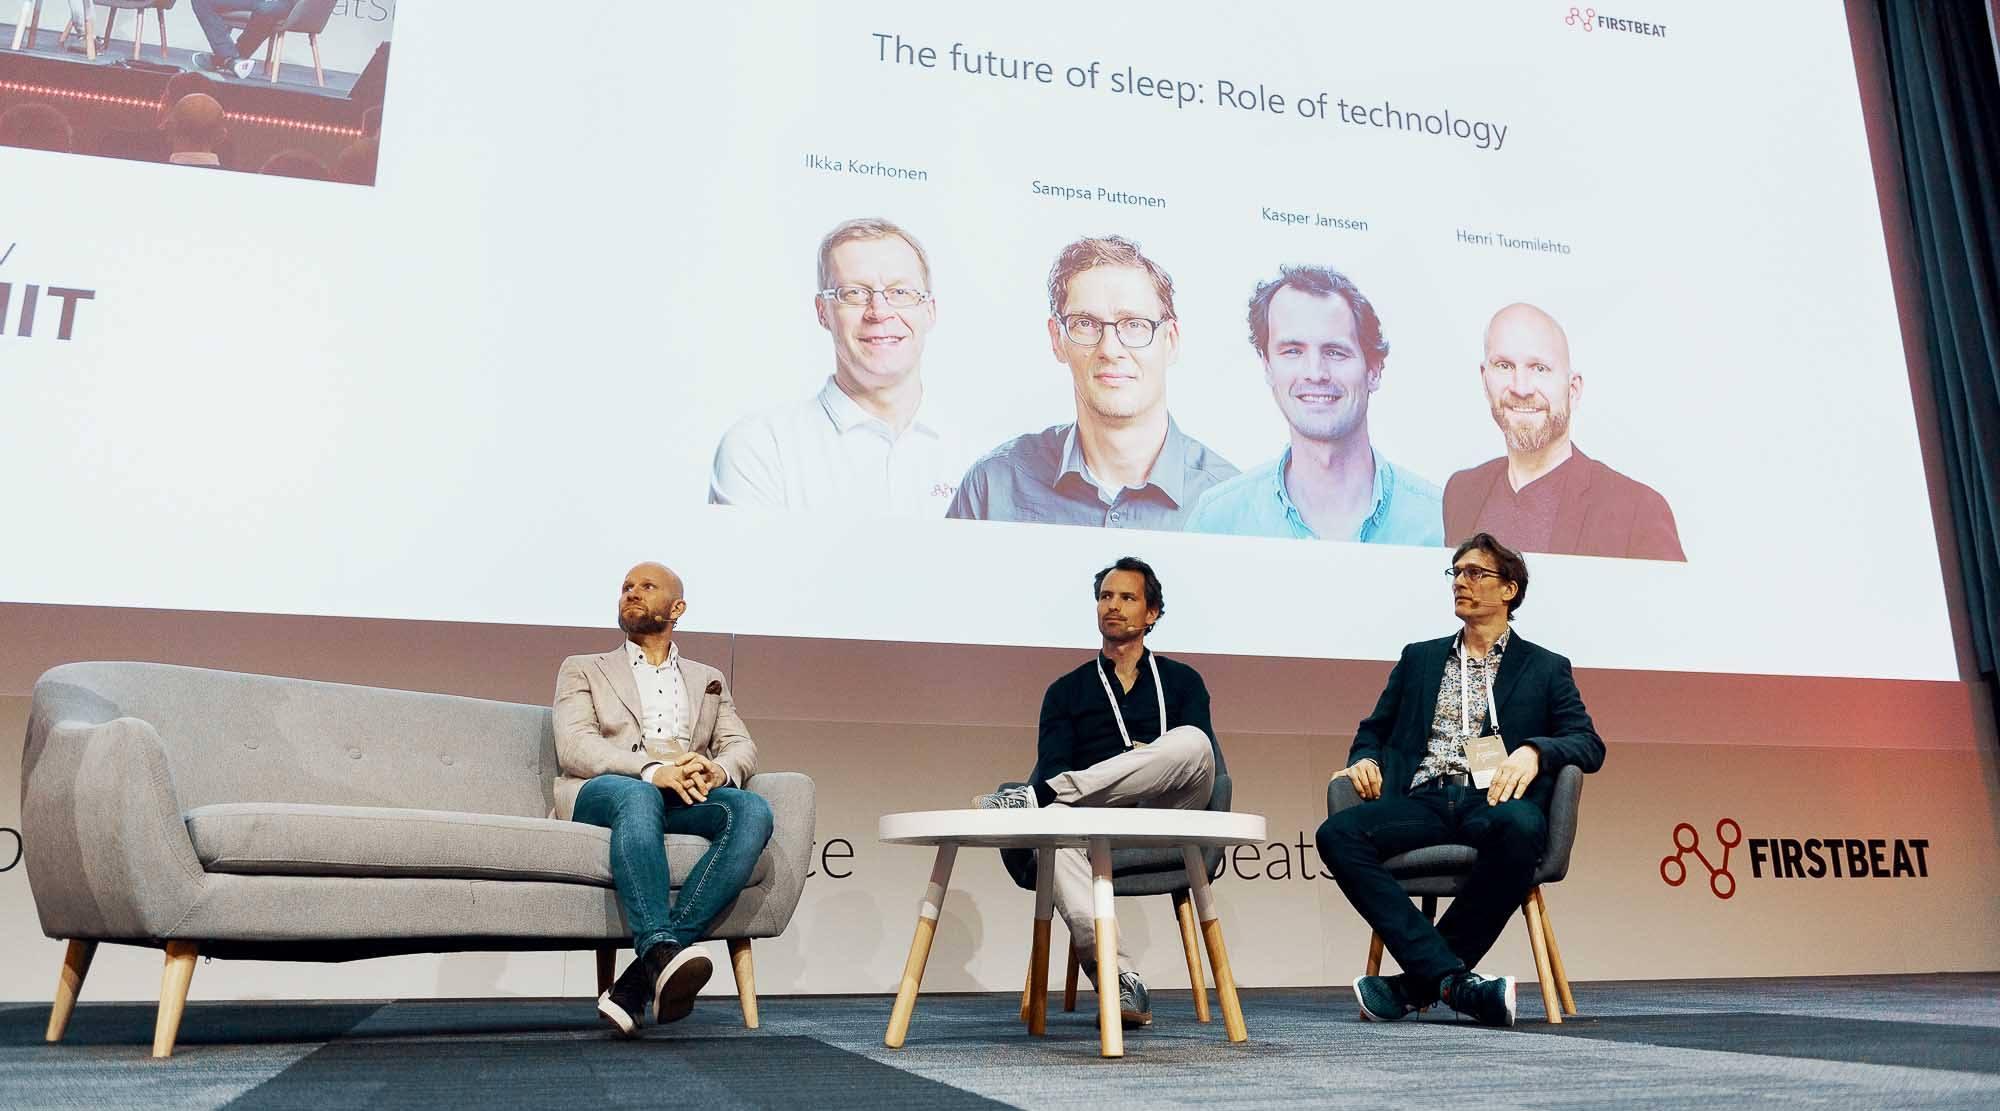 The future of sleep: Role of technology Panel discussion